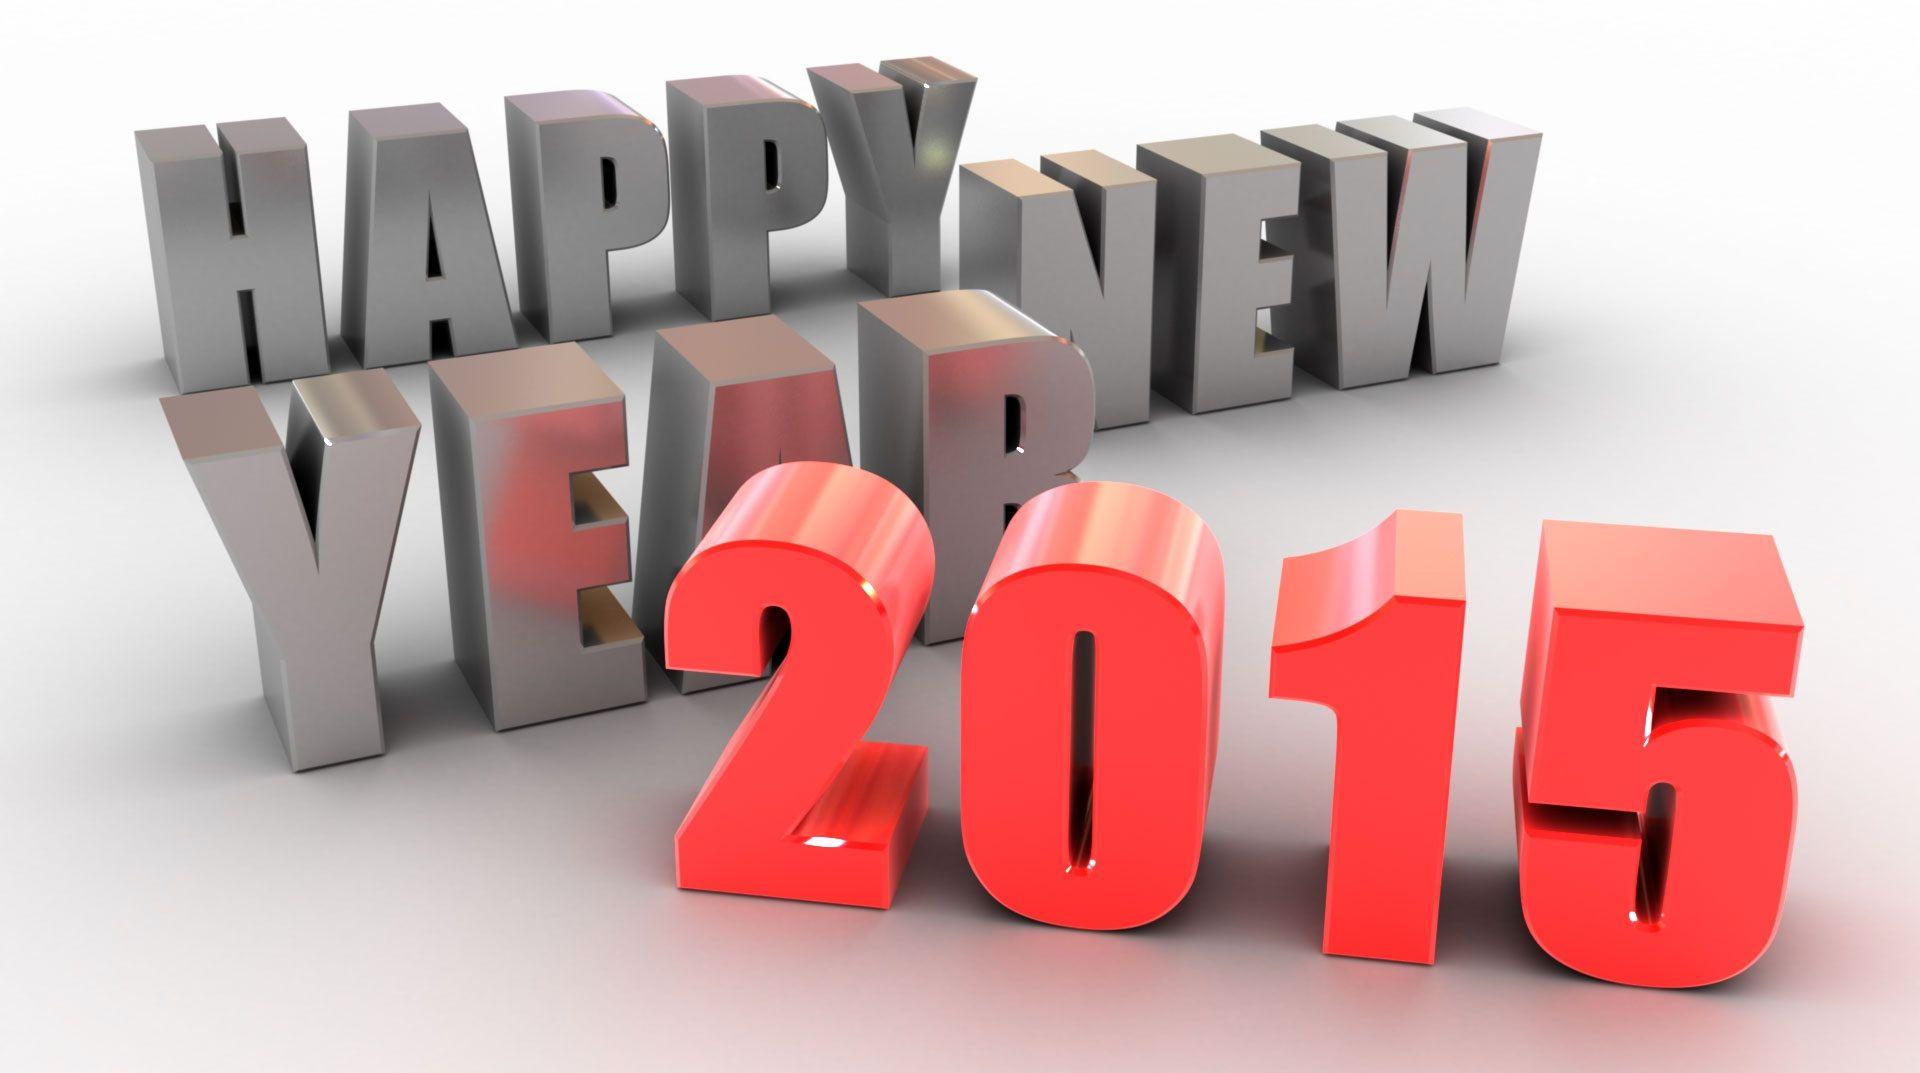 HD Wallpaper Happy New Year 2015 Free Download